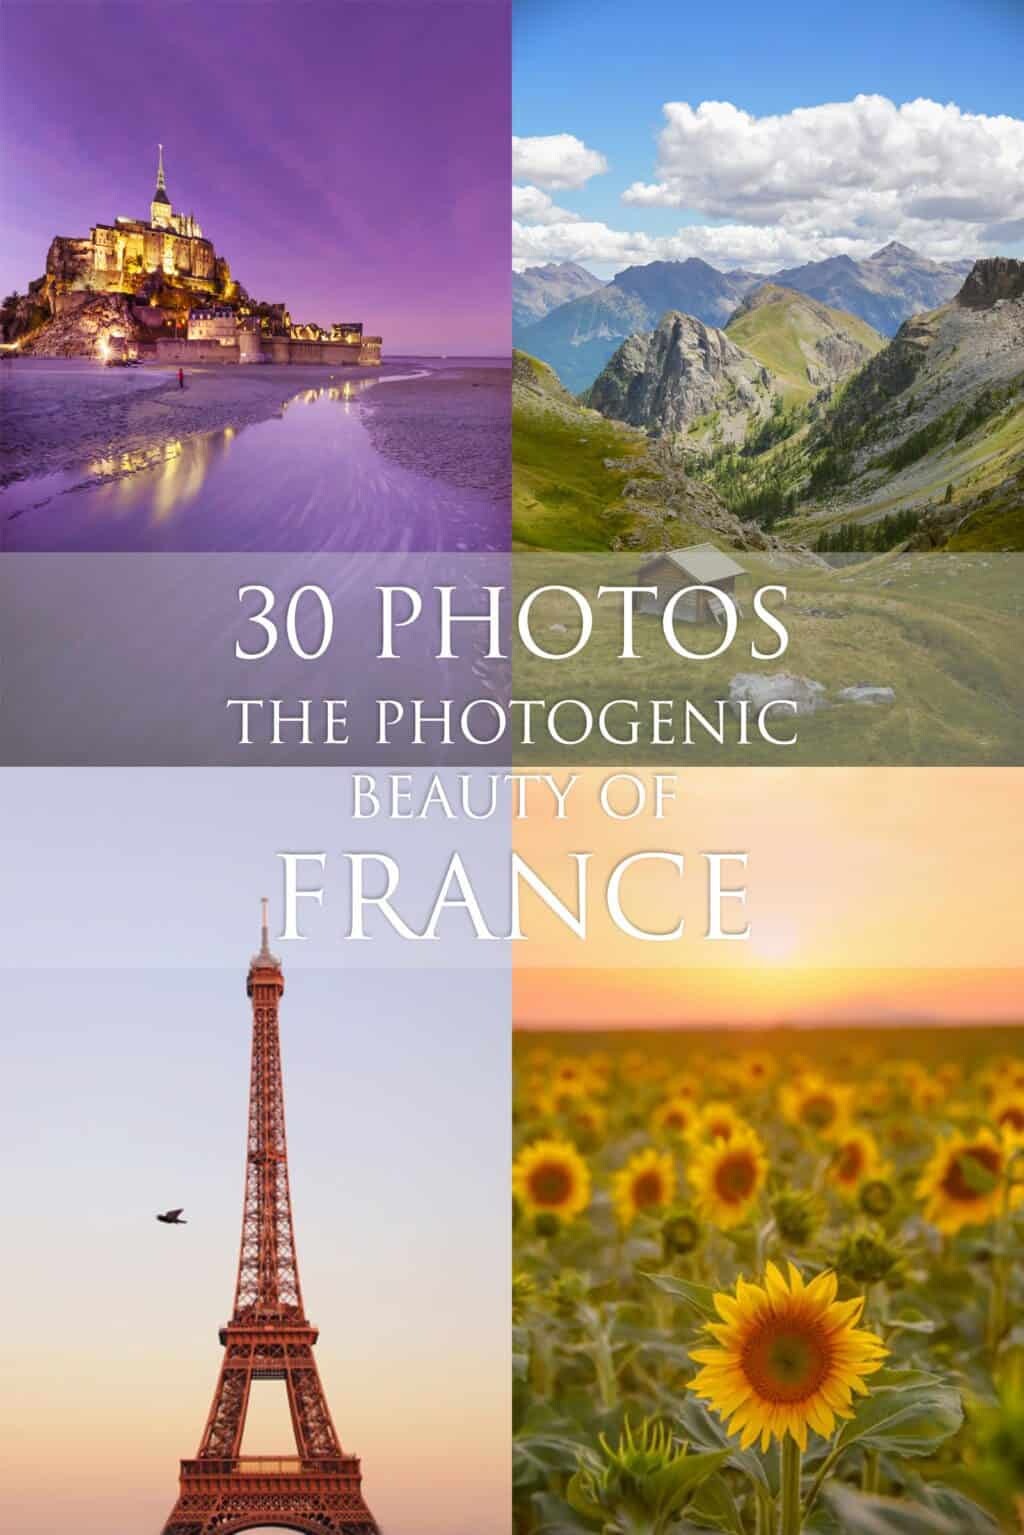 Travel in France, where to go in France and see natural beauty, outdoors experiences and Paris photo locations by The Wandering Lens